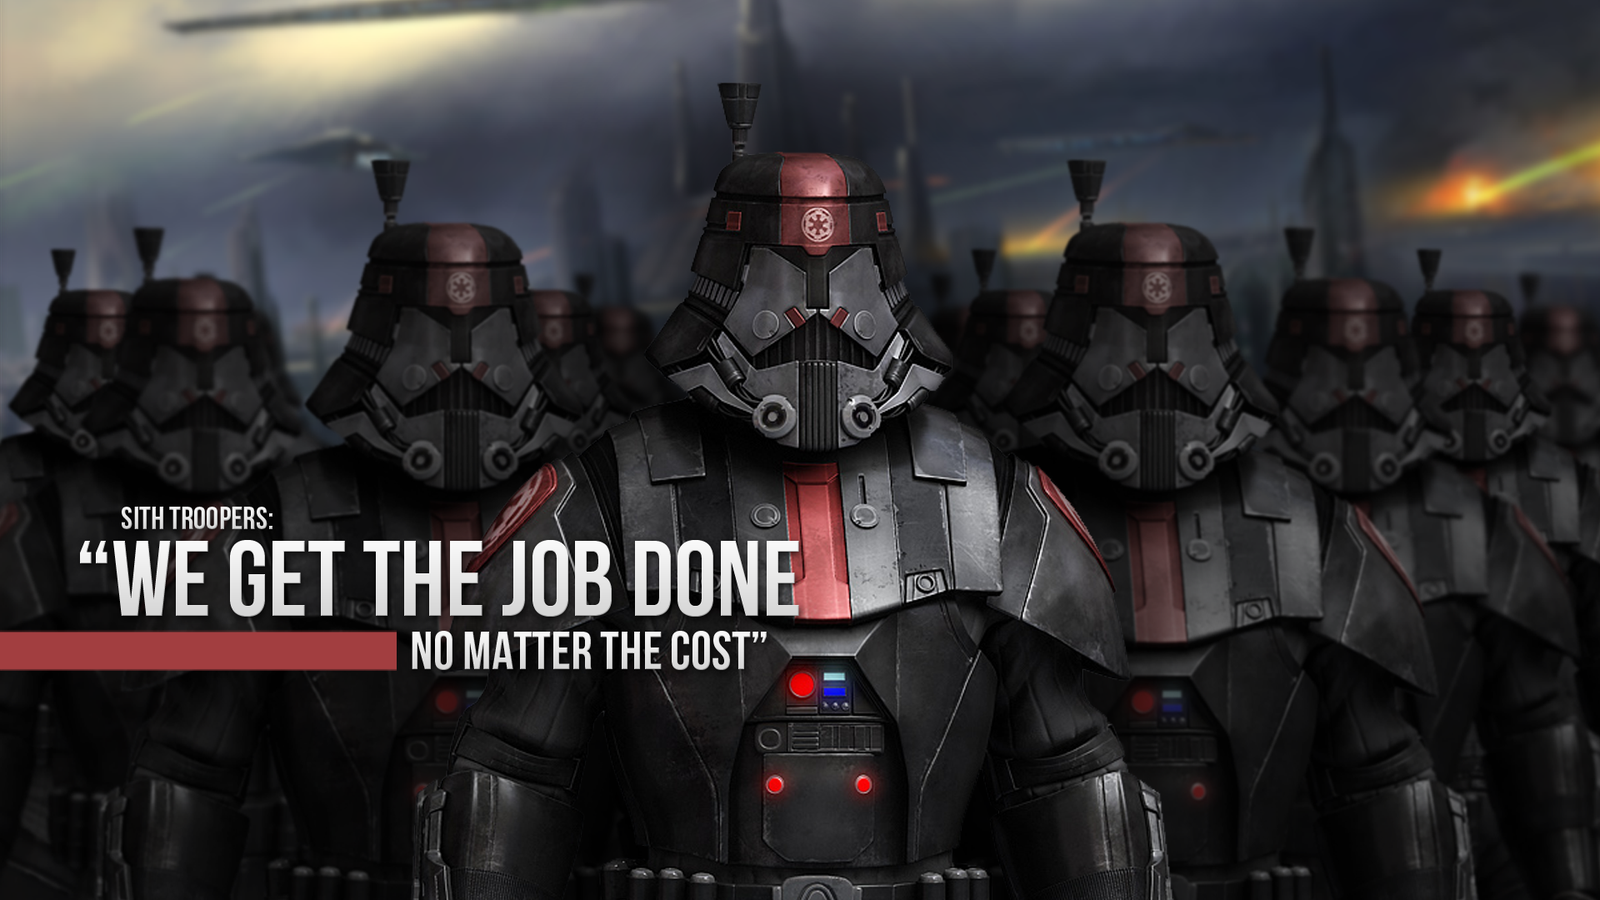 Sith Wallpaper 1080p Sith troopers 1080p by